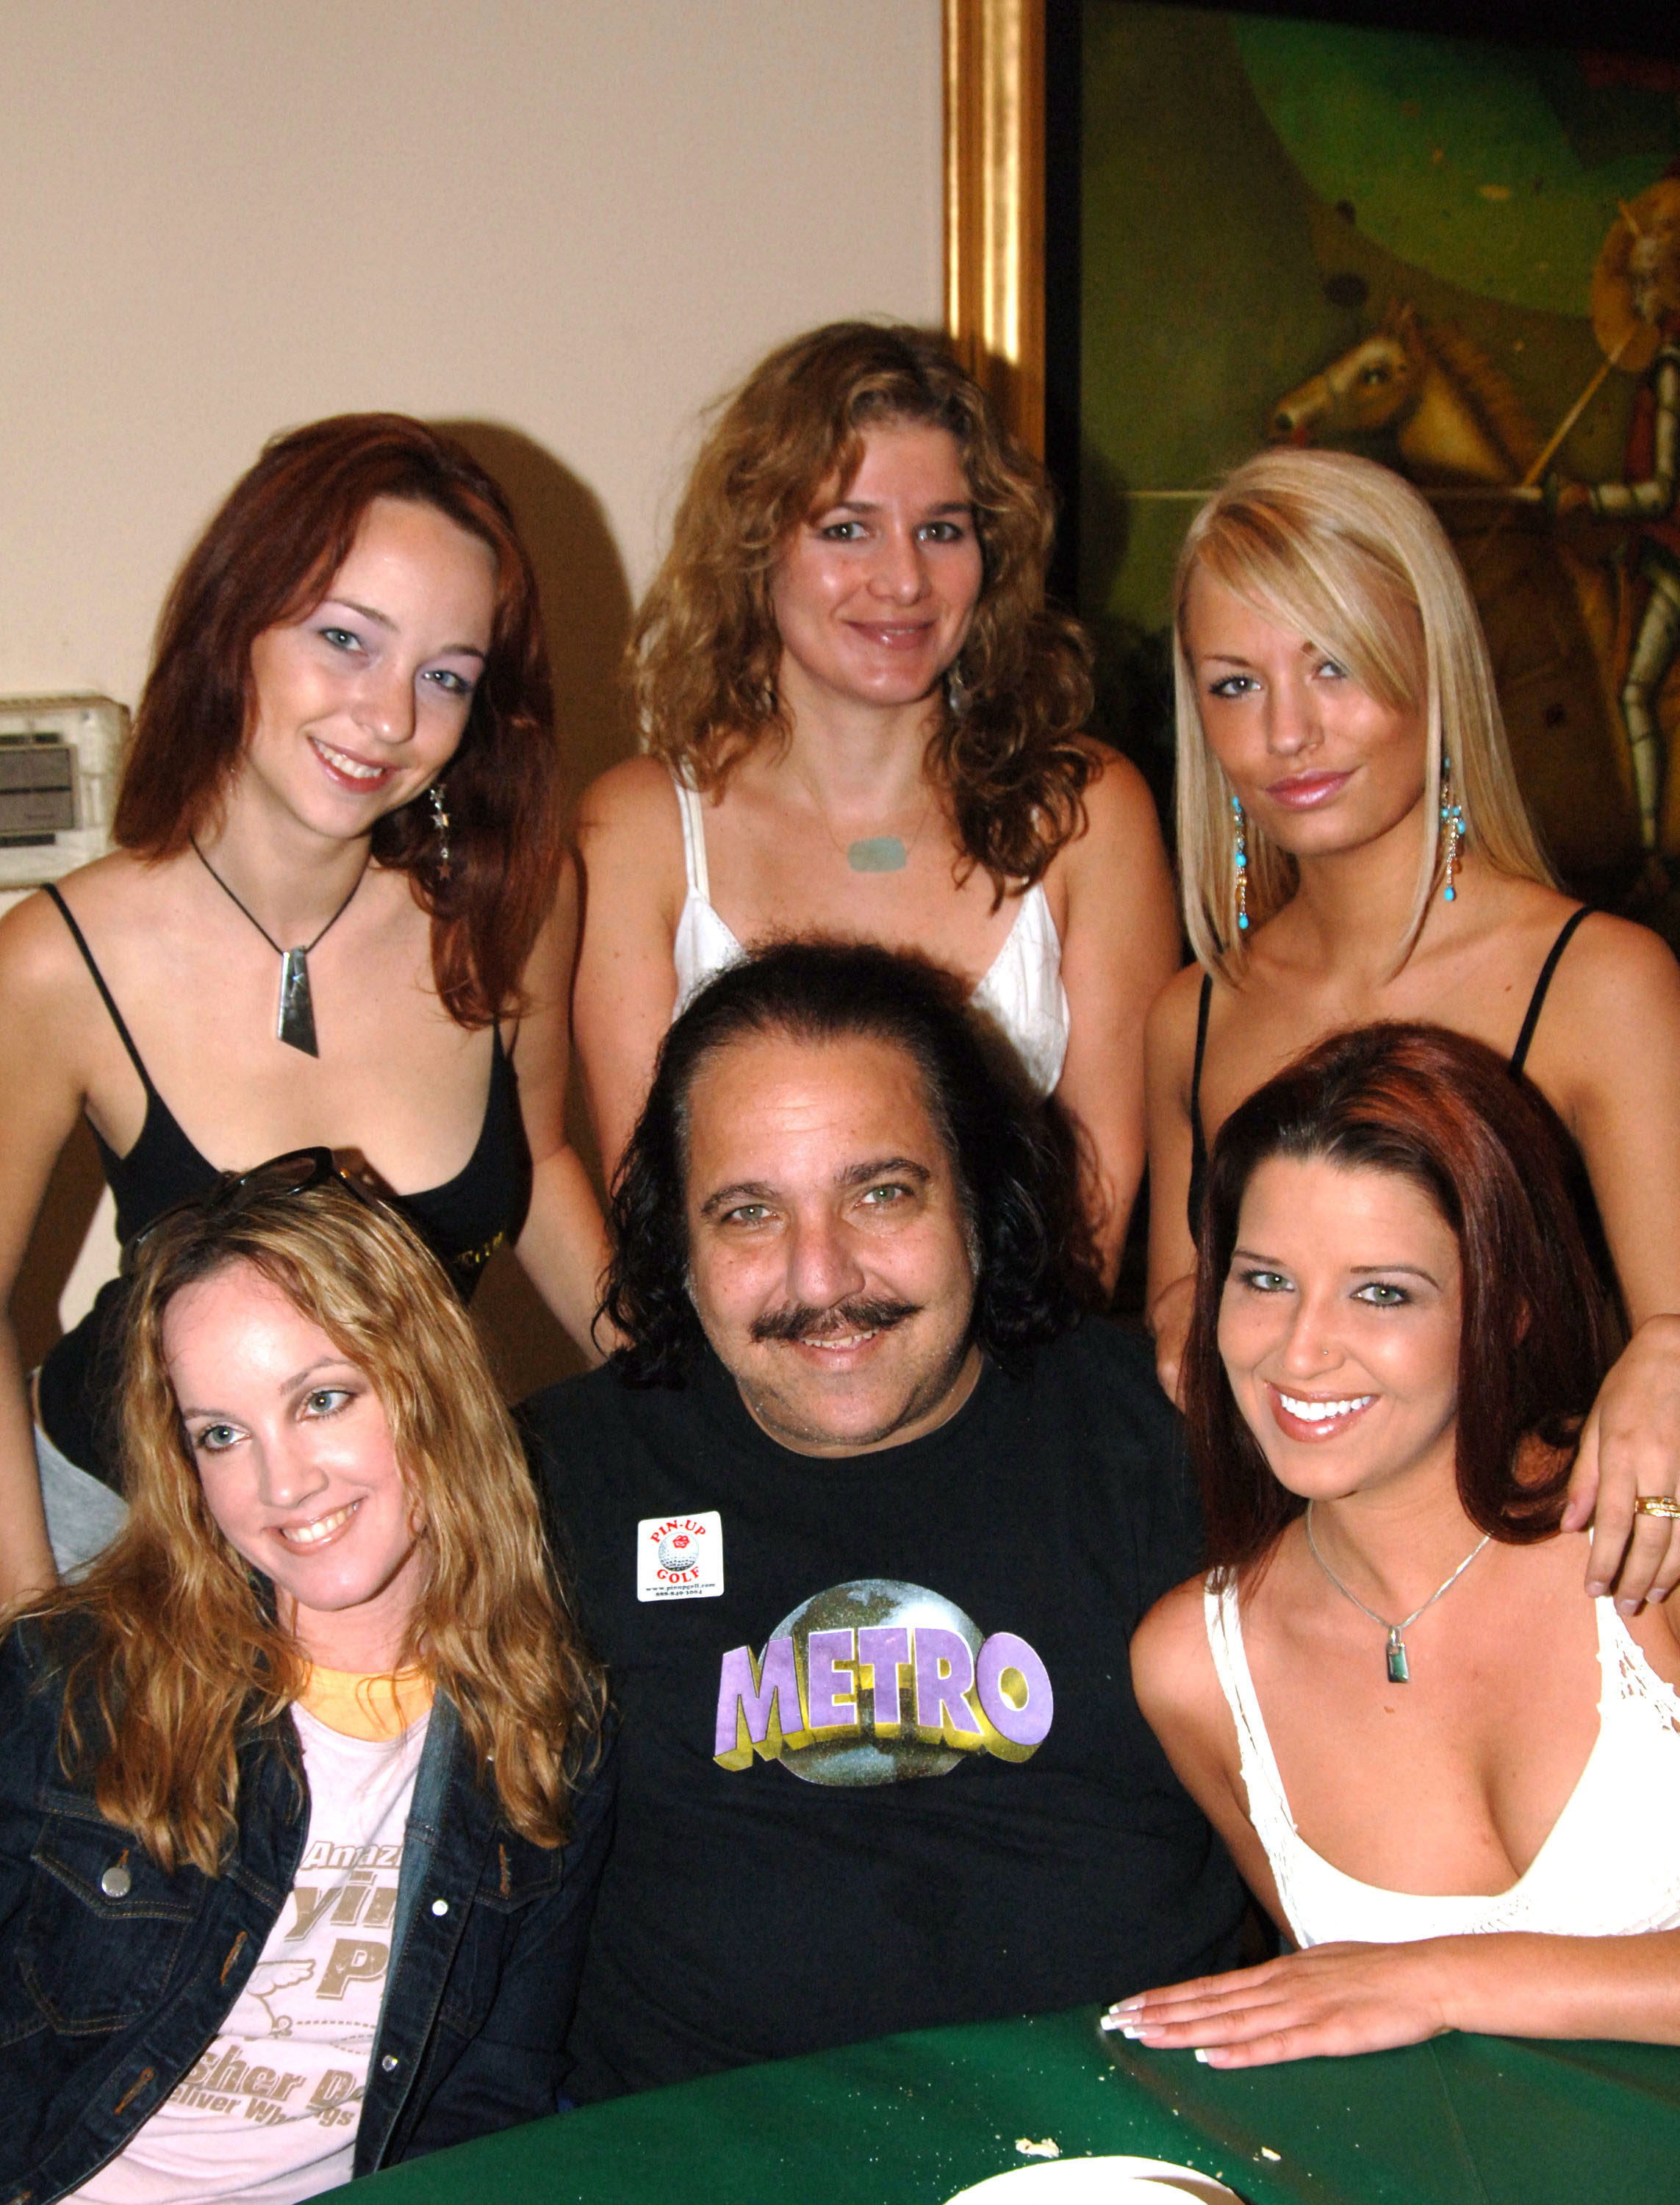 brian visser recommends ron jeremy when he was young pic